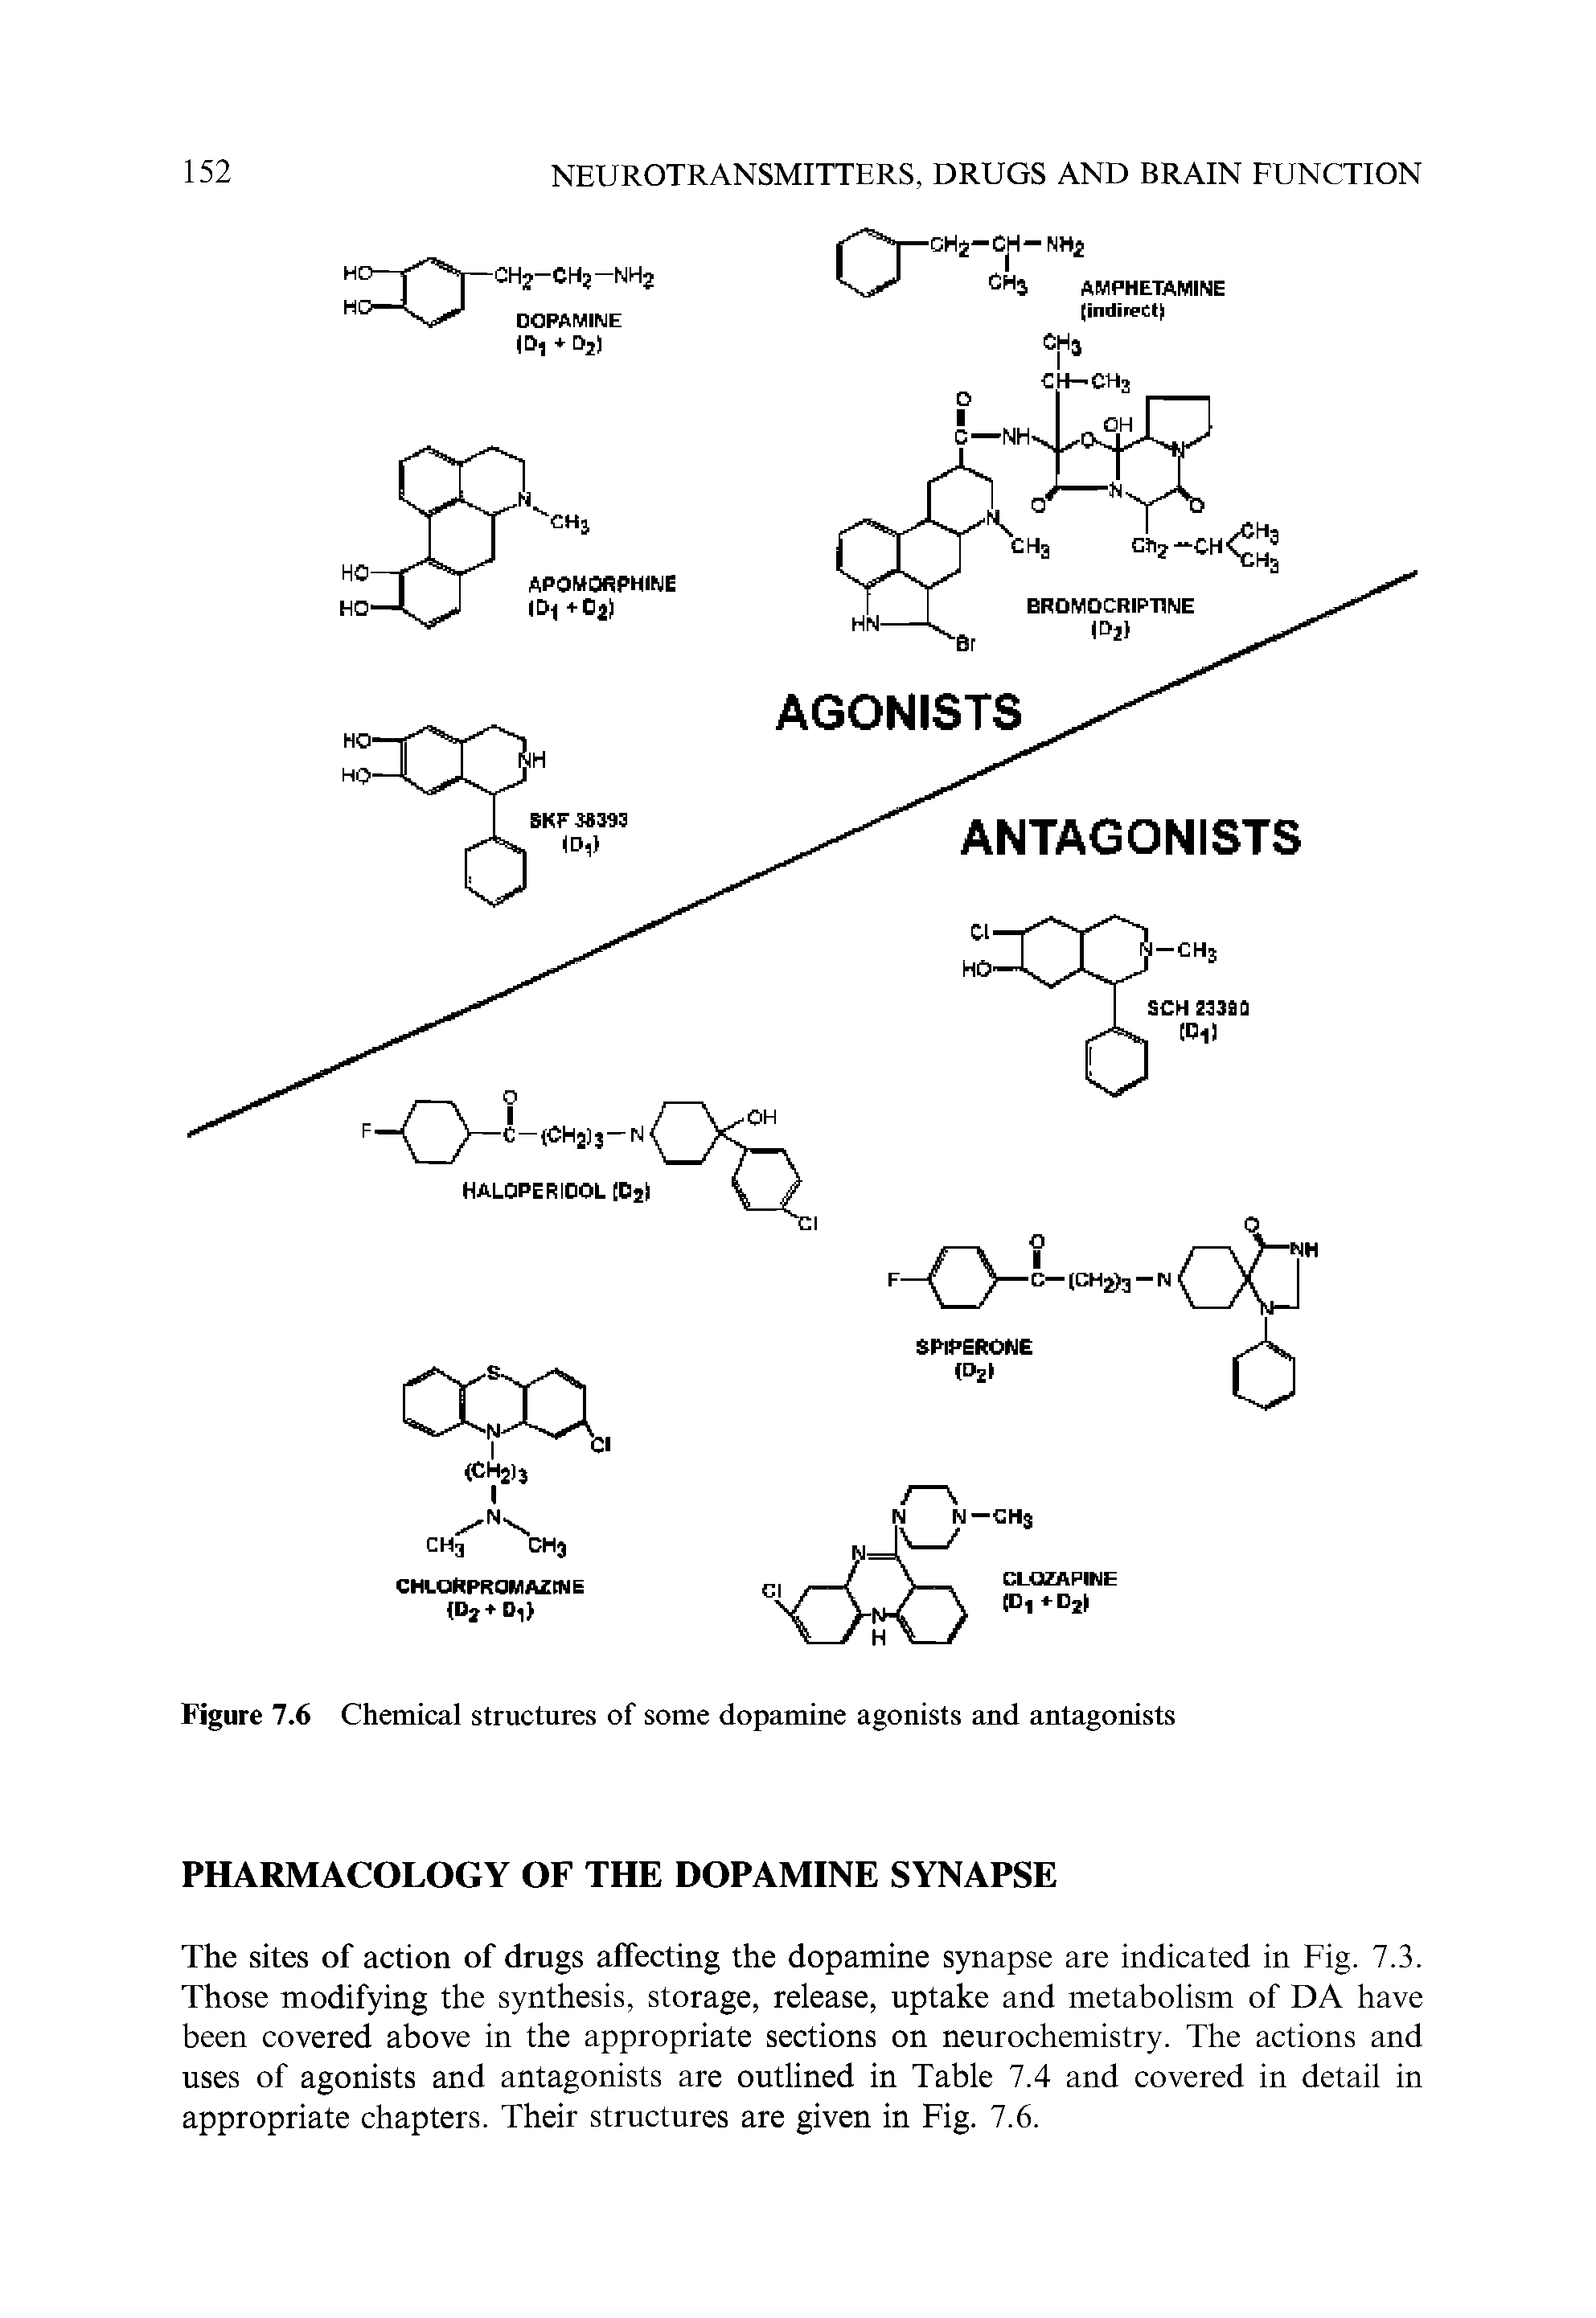 Figure 7.6 Chemical structures of some dopamine agonists and antagonists...